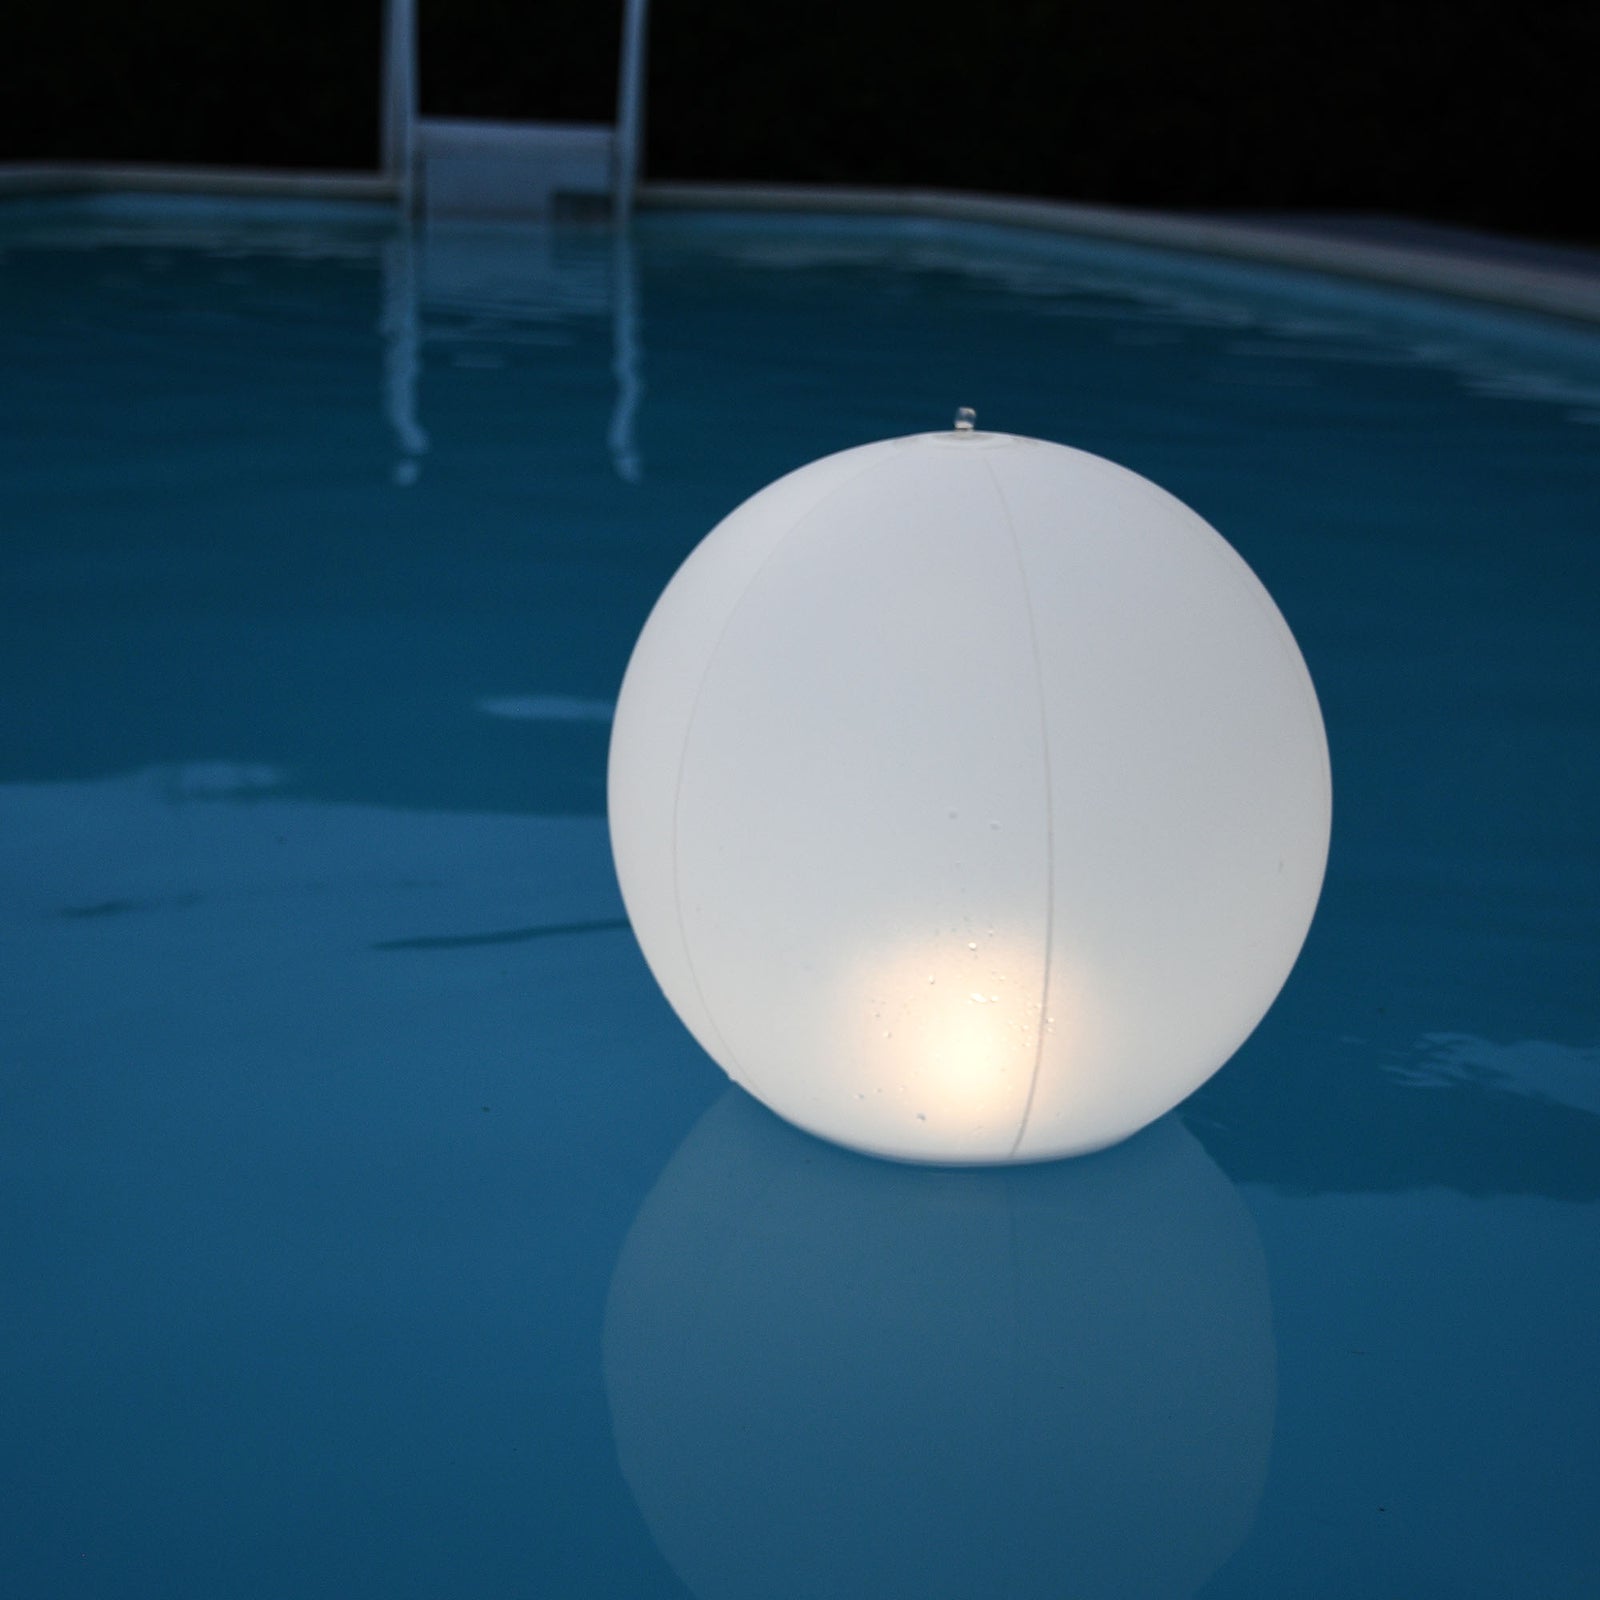 Ballon gonflable solaire flottant 5 animations Buly